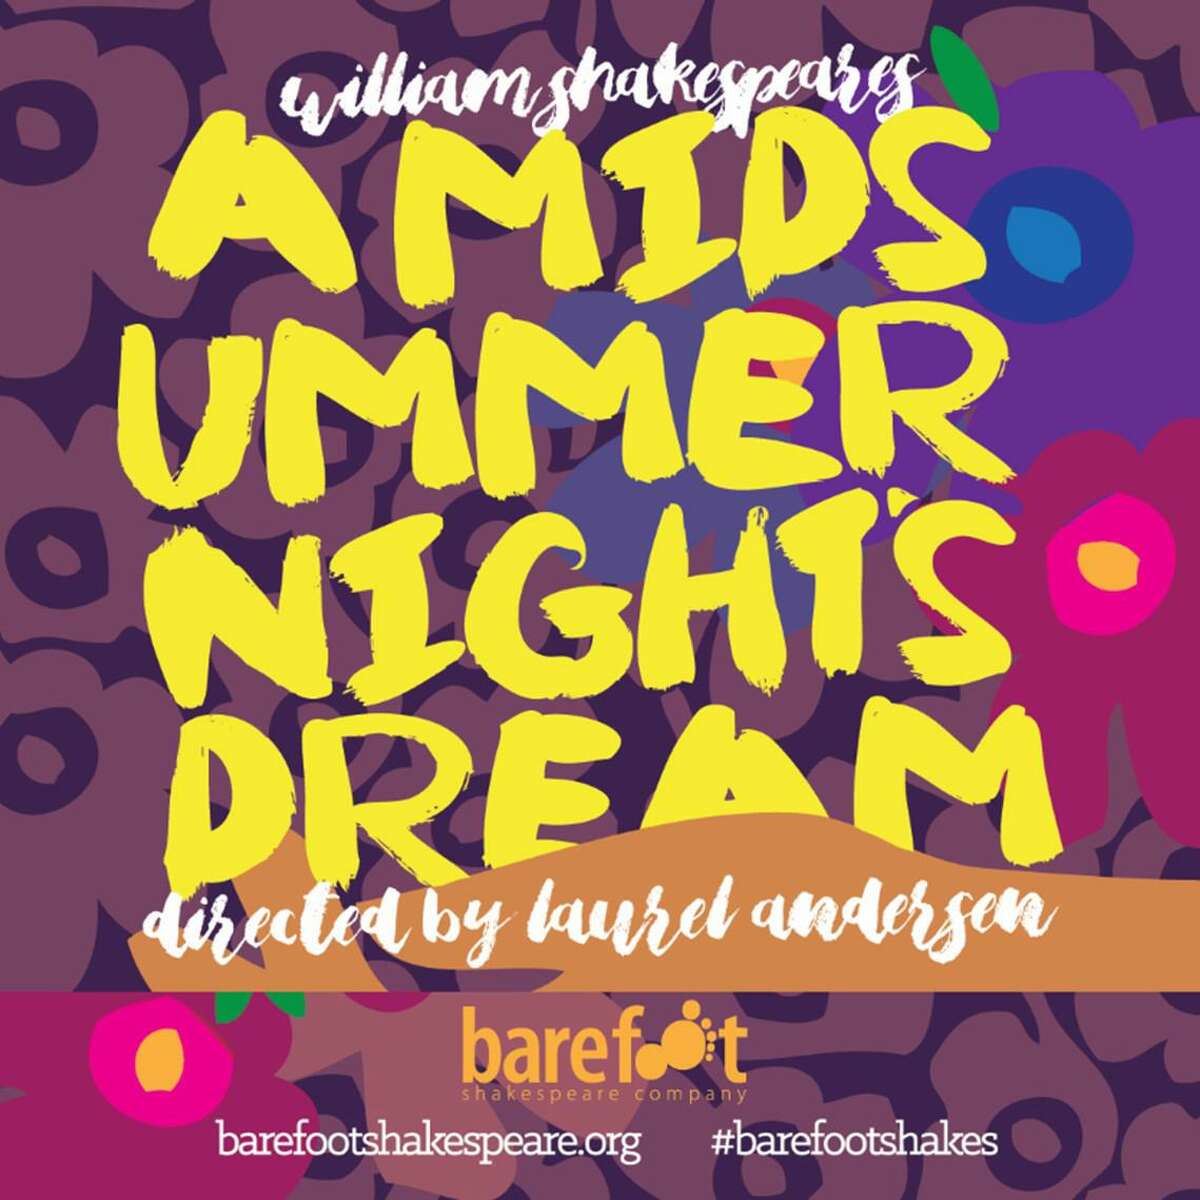 The Ridgefield Library presents a virtual live reading performance of Shakespeare’s “A Midsummer Night’s Dream” by the Barefoot Shakespeare Sunday, Aug. 2, at 4 p.m.